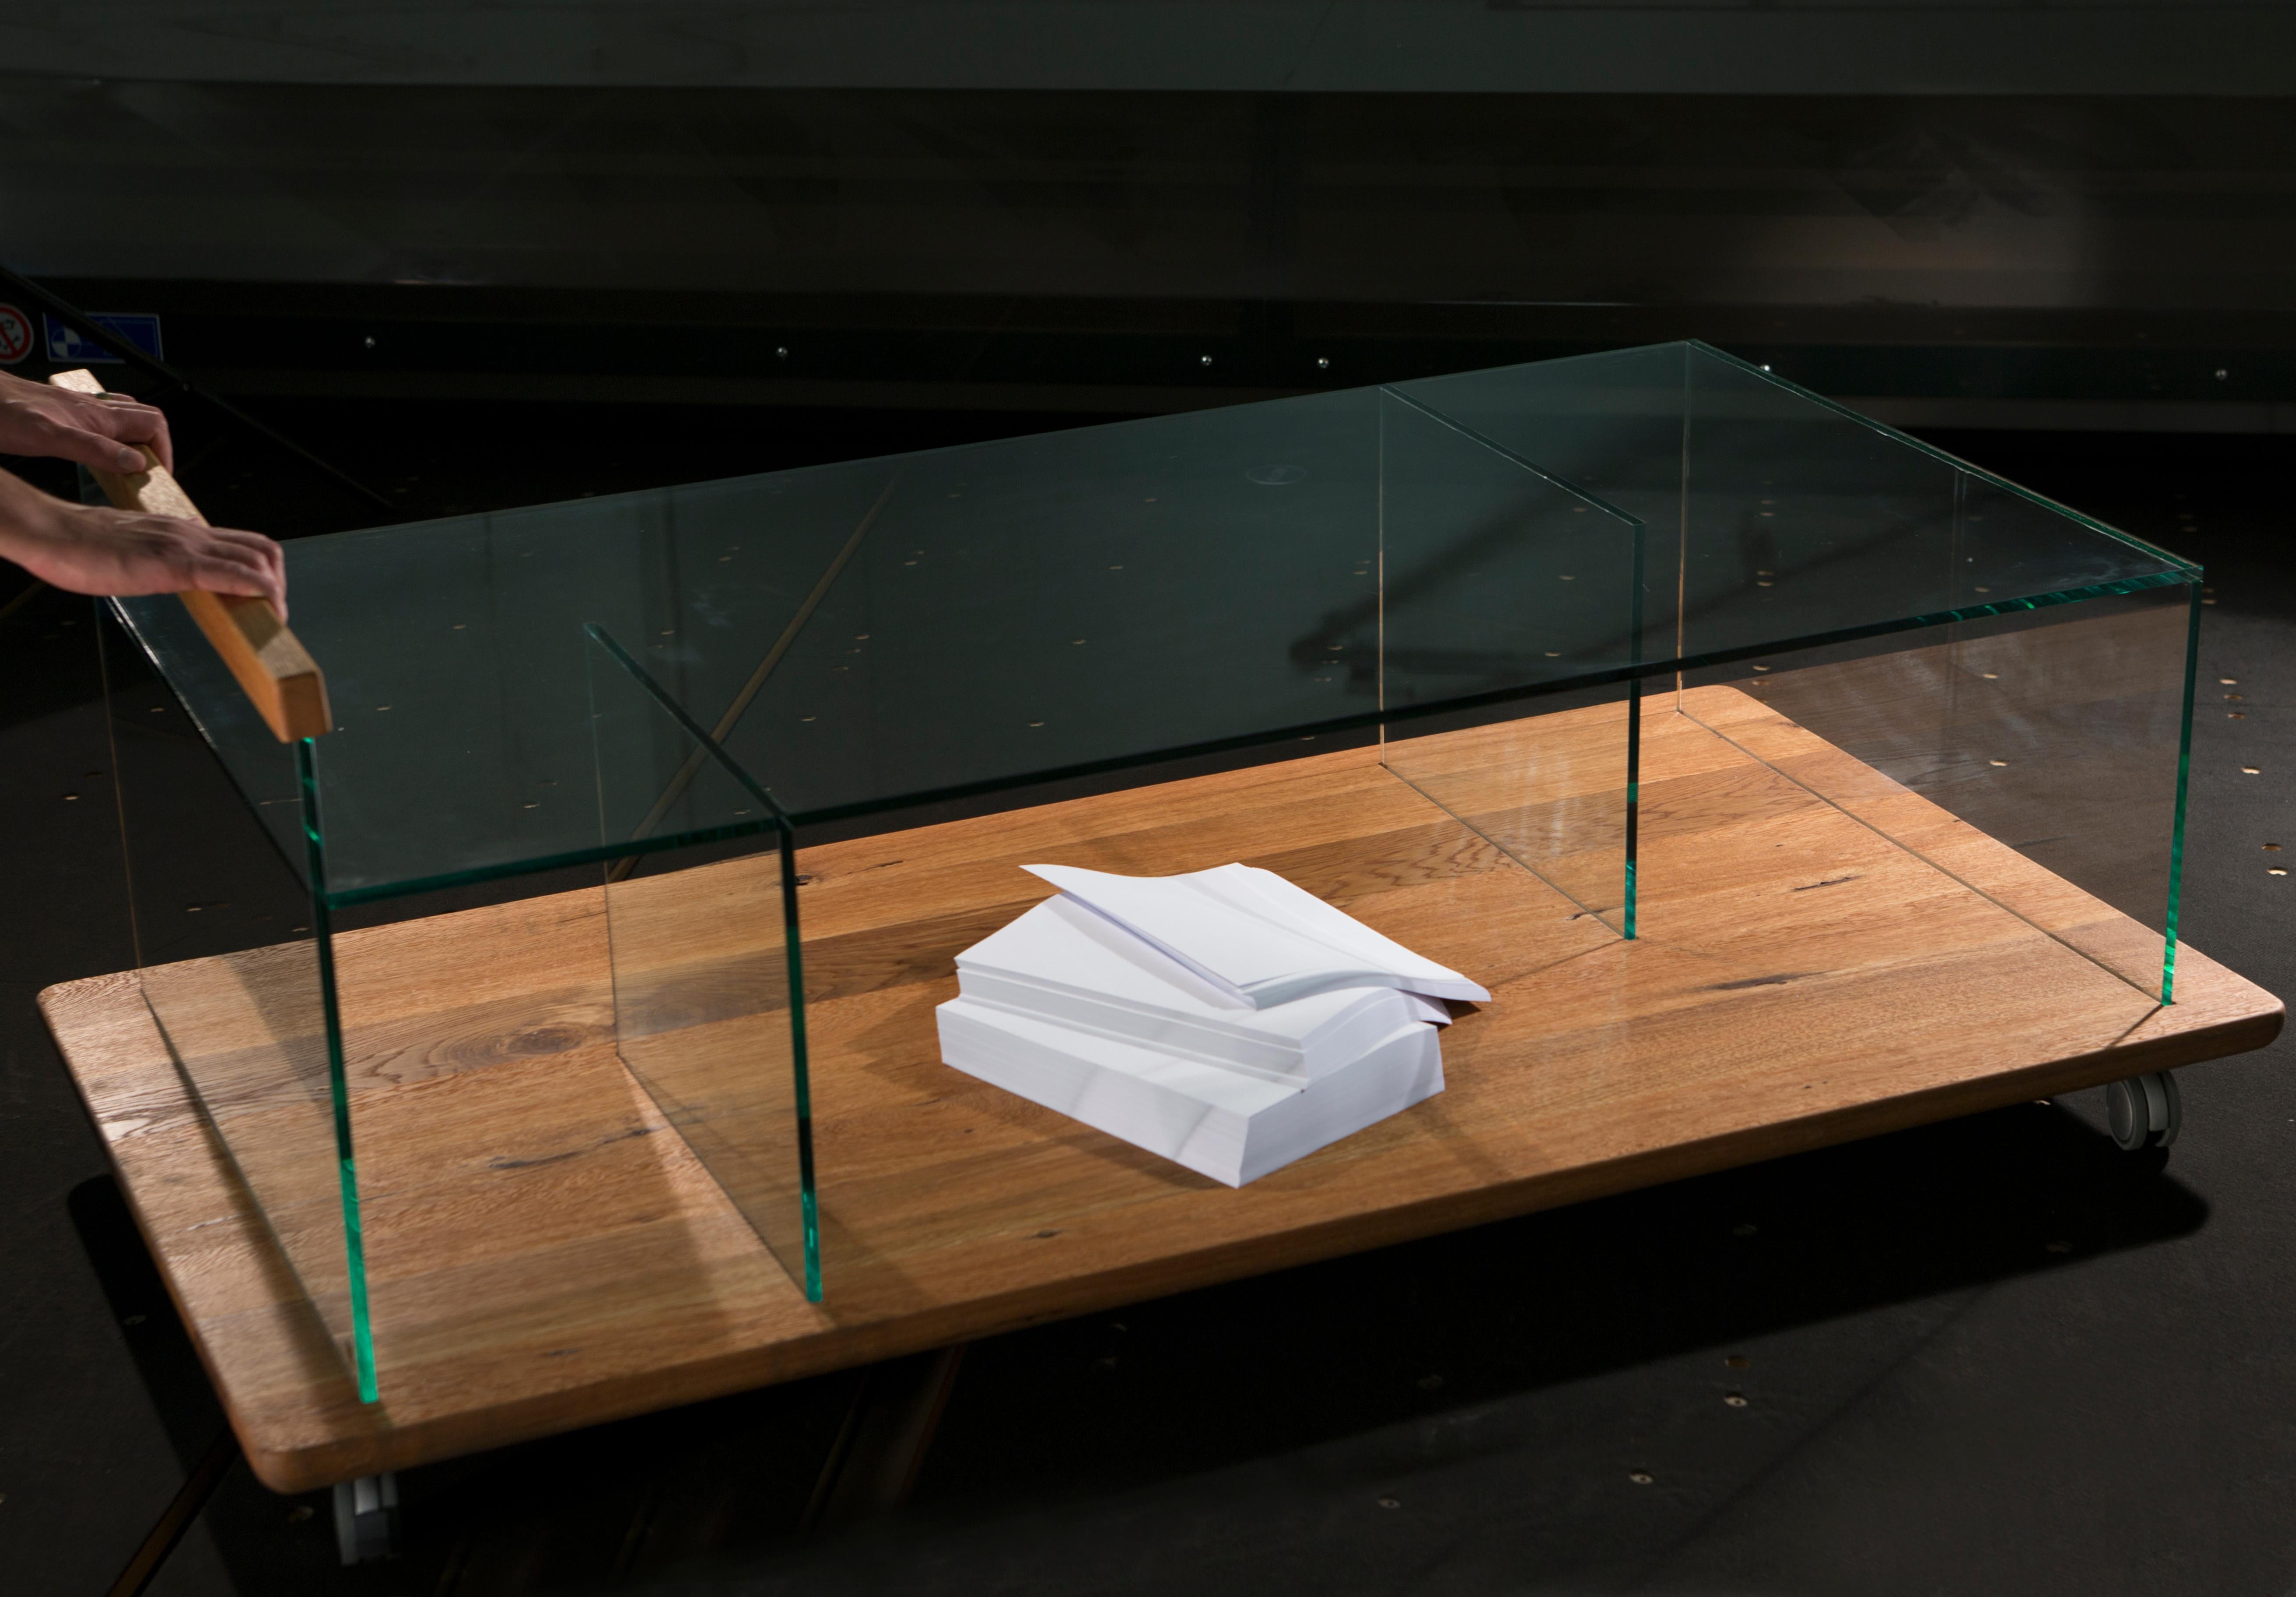 Space coffee table by Rectangle Studio
Dimensions: W 156 x D 80 x H 60 cm
Materials: Massive oak, natural wood oil, transparent tempered glass,
black wheel

Space coffee table re-interprets the gaps in your office home etc. Based on the concept